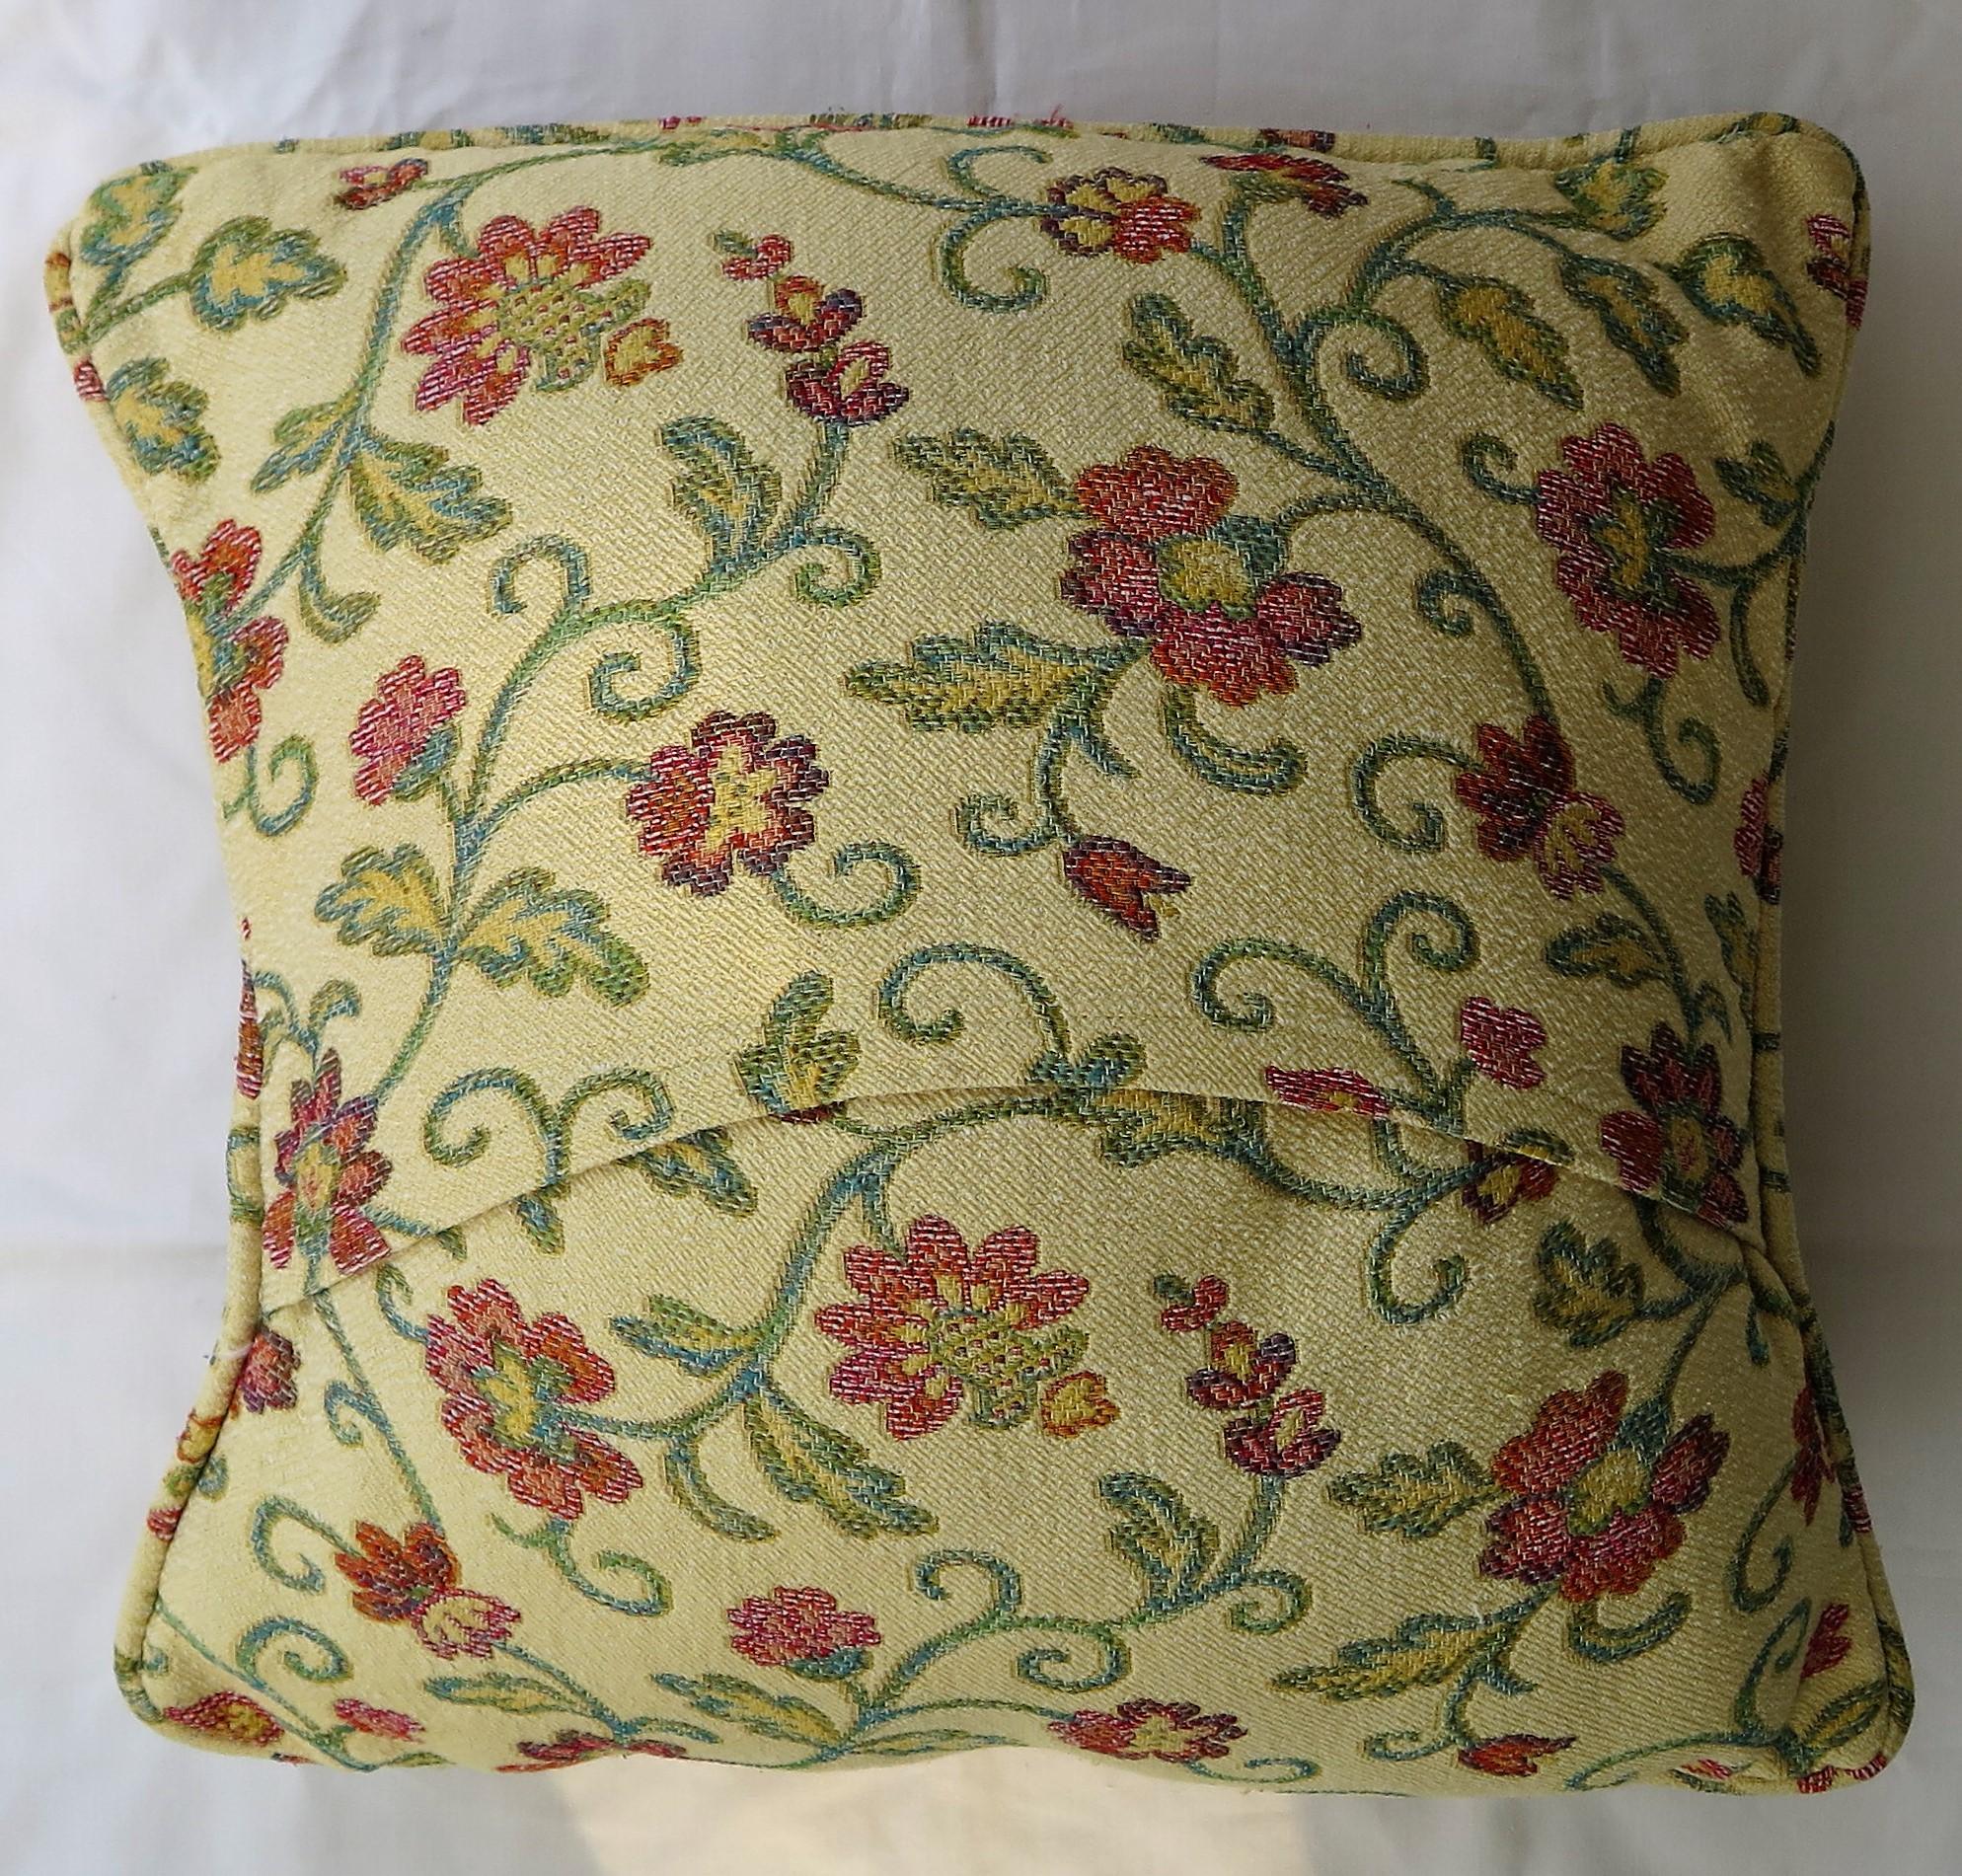 Woven Cushion or Pillow in Art Nouveau Floral Vine Style, 20th Century For Sale 4